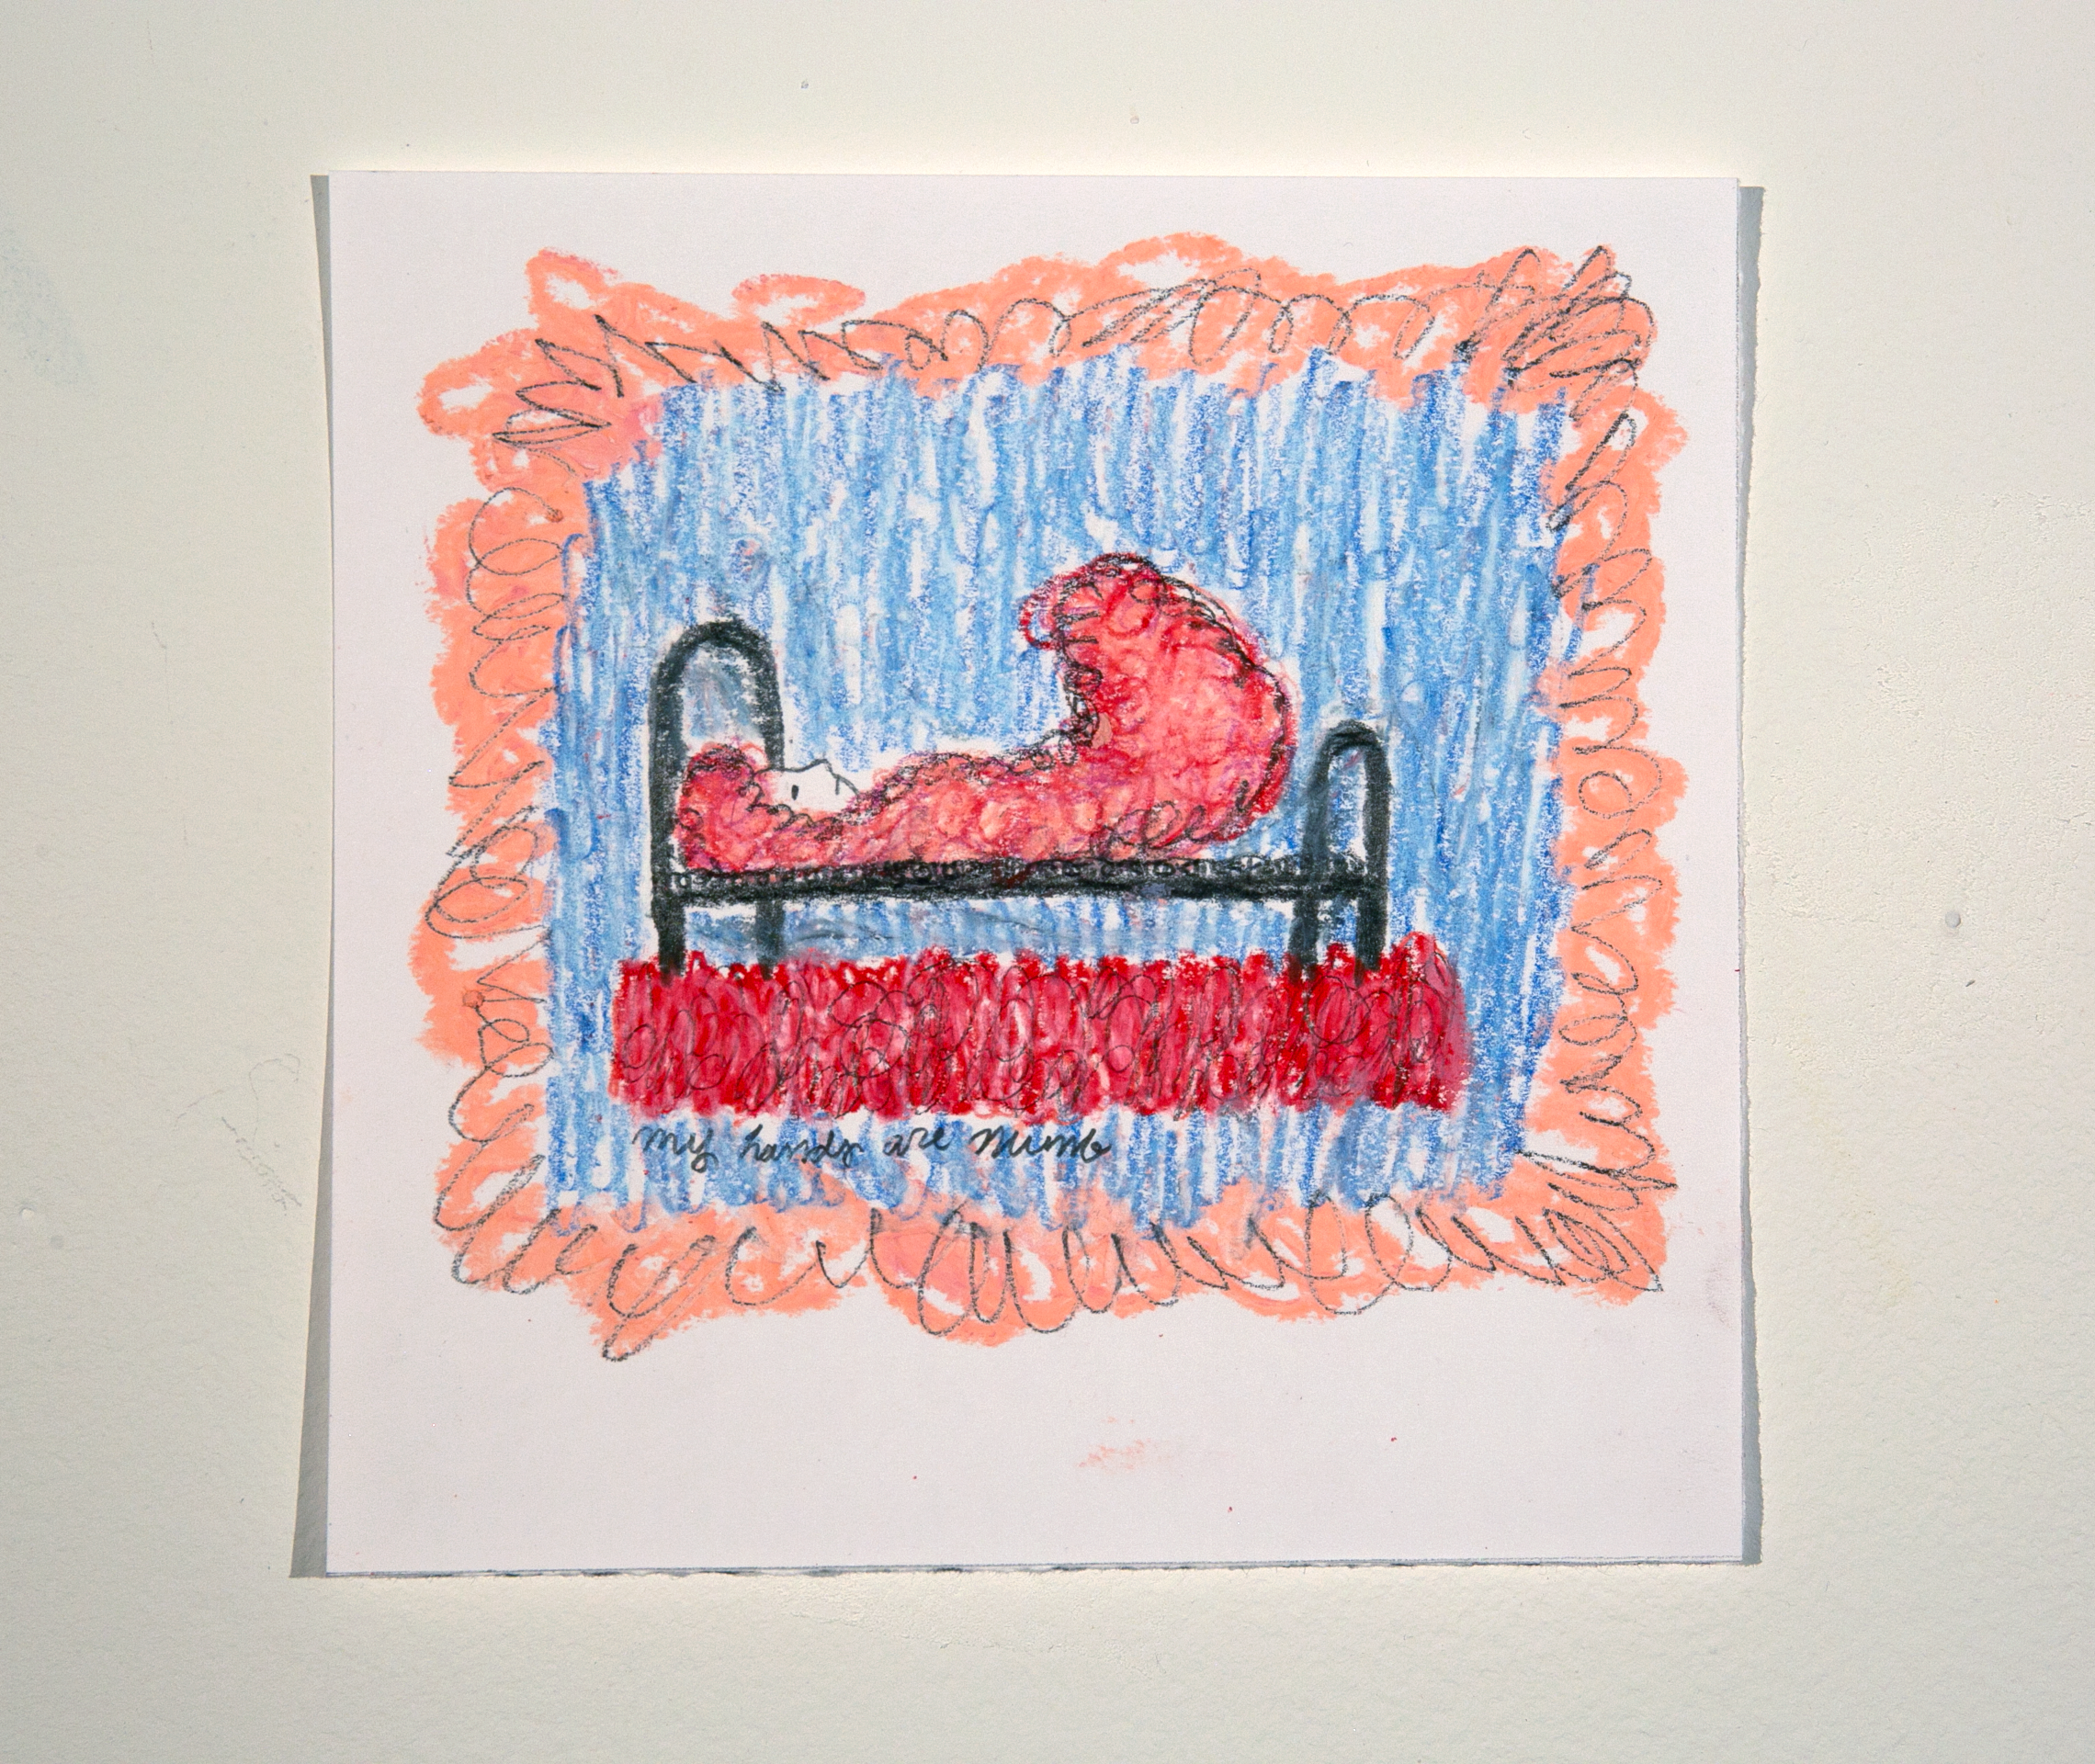 Drawing after Philip Guston's "Painting, Smoking, Eating"